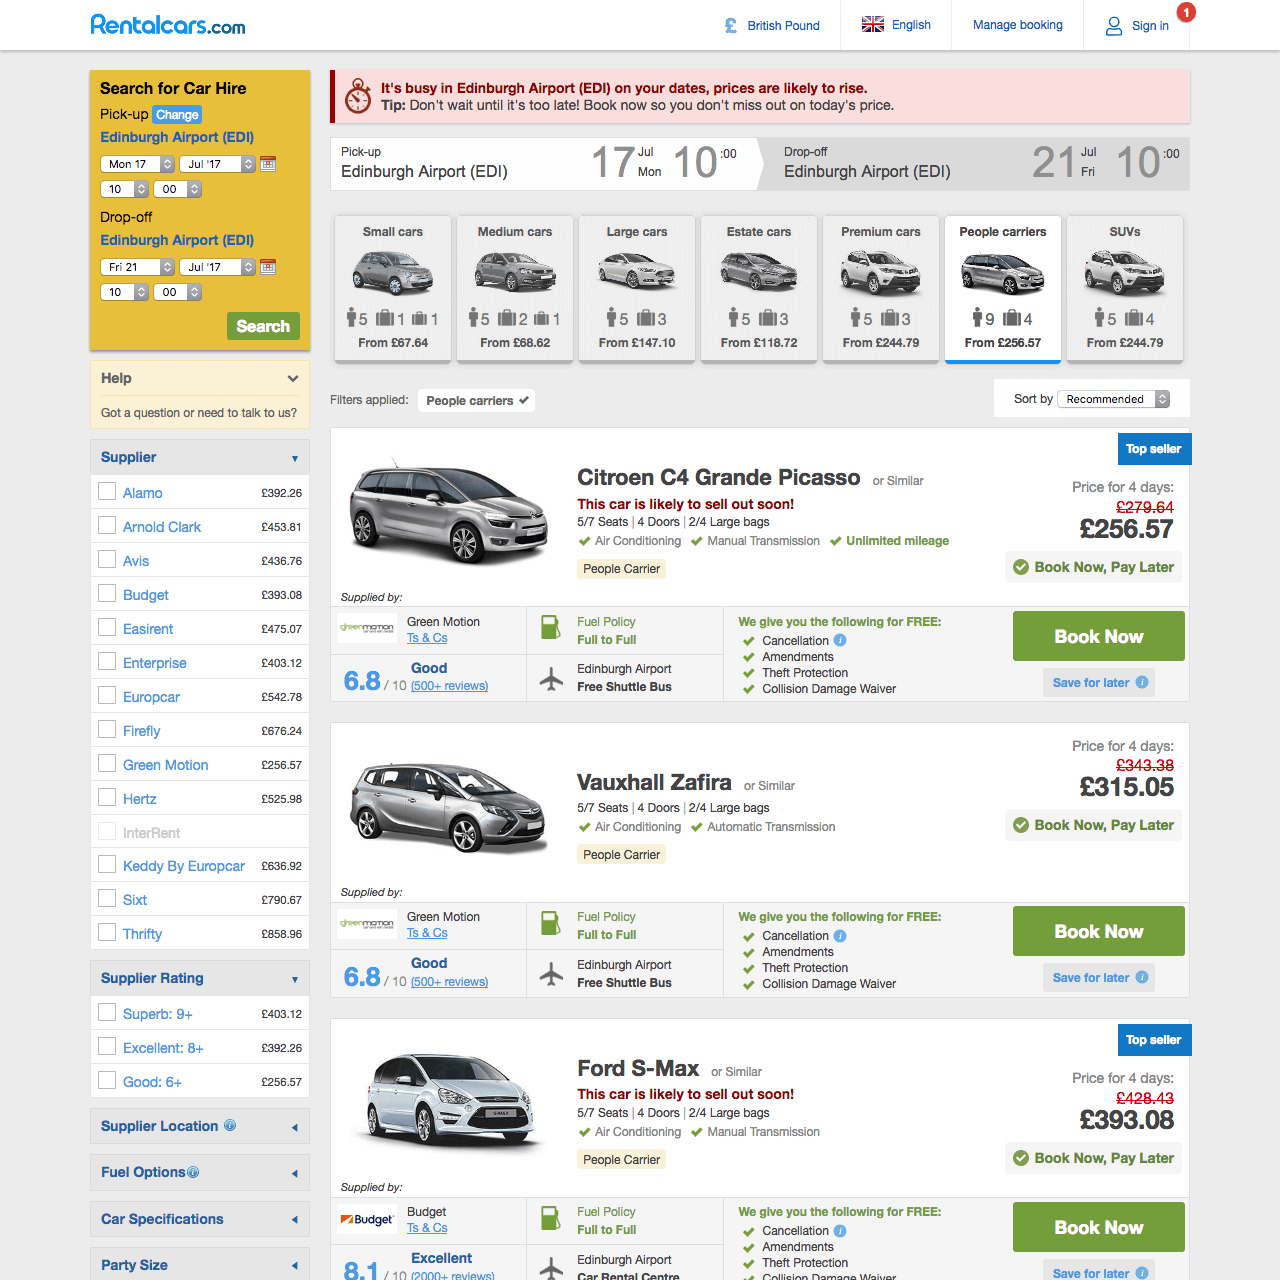 Screenshot from an old Rentalcars.com page showing urgency messages.